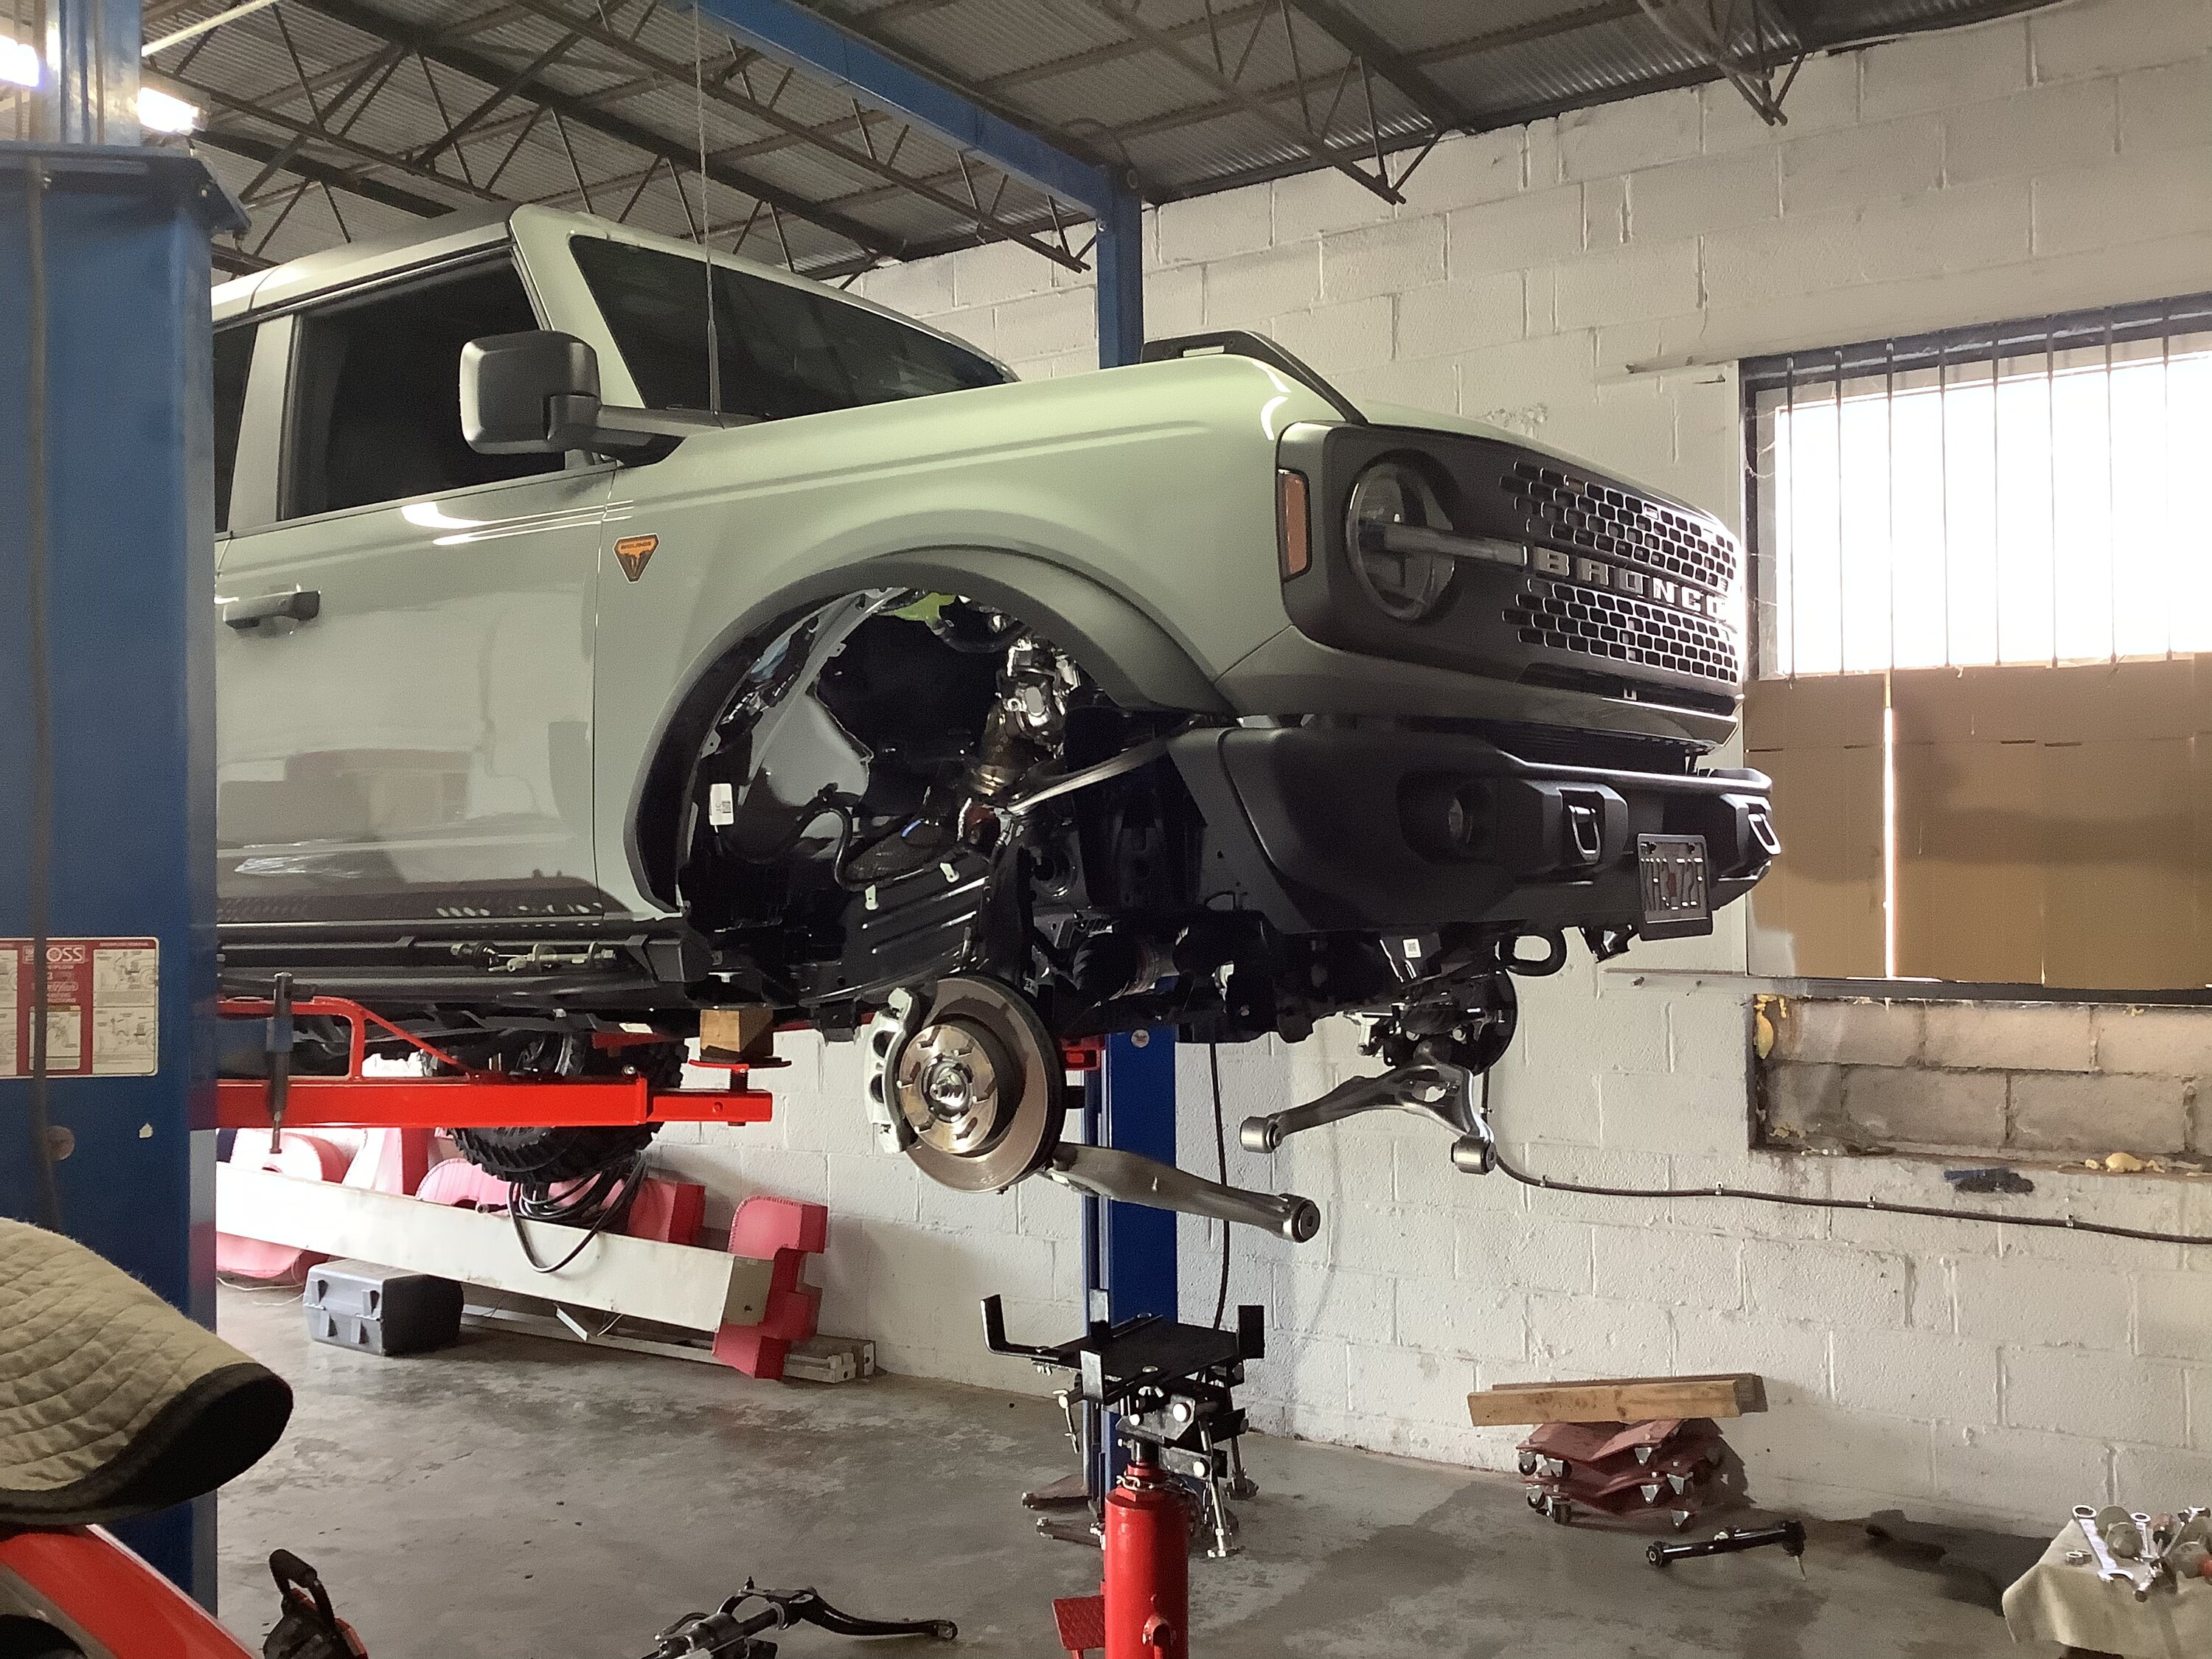 Ford Bronco Asking what's been asked before, what do I need for 35's/37's A5C294E9-8D14-4517-B769-0170FFAA1509